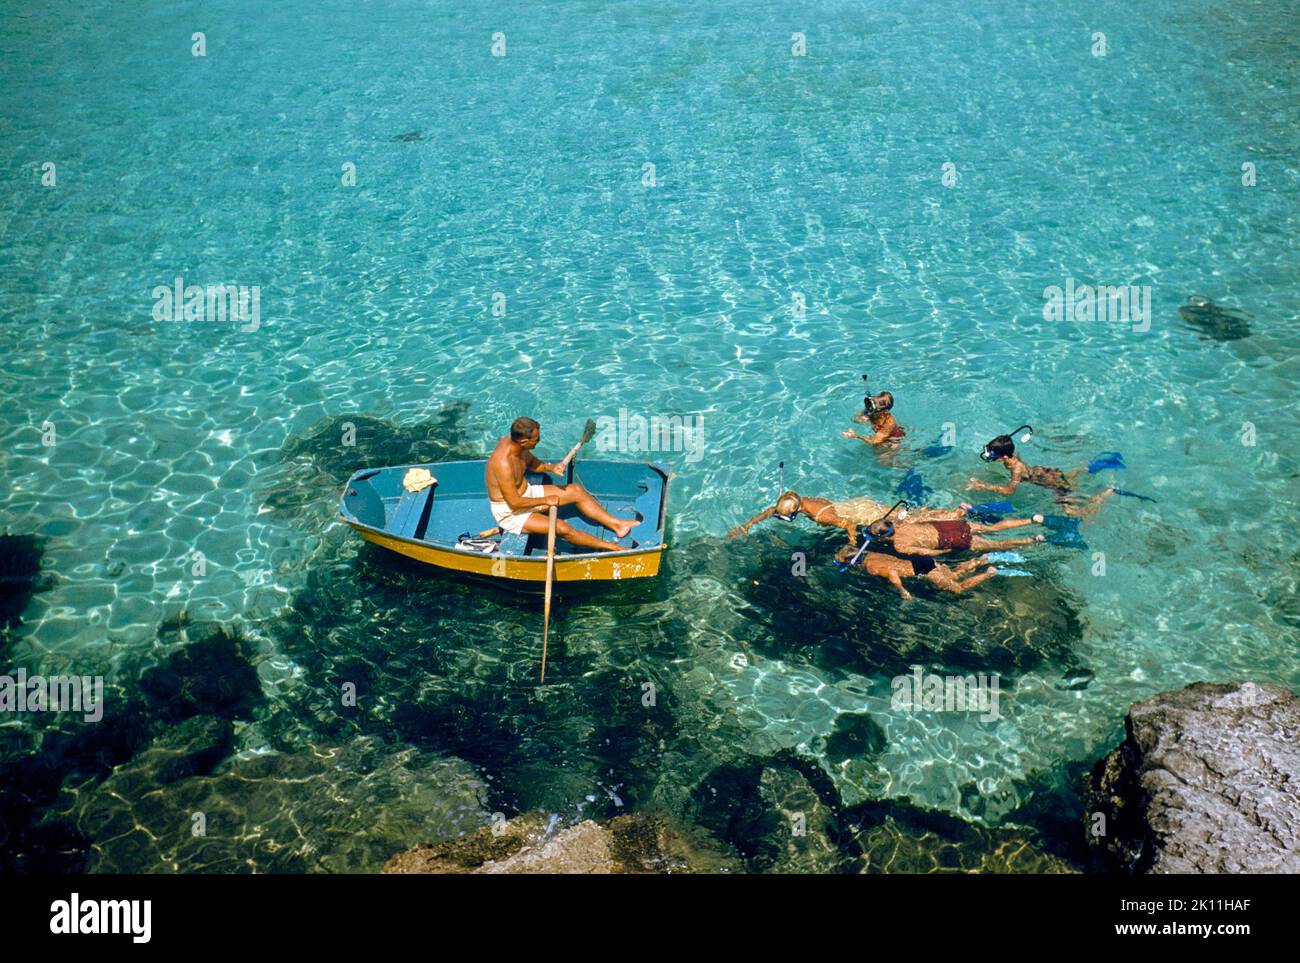 High Angle View of Family Snorkeling, Bermuda, Toni Frissell Collection, 1956 Stock Photo